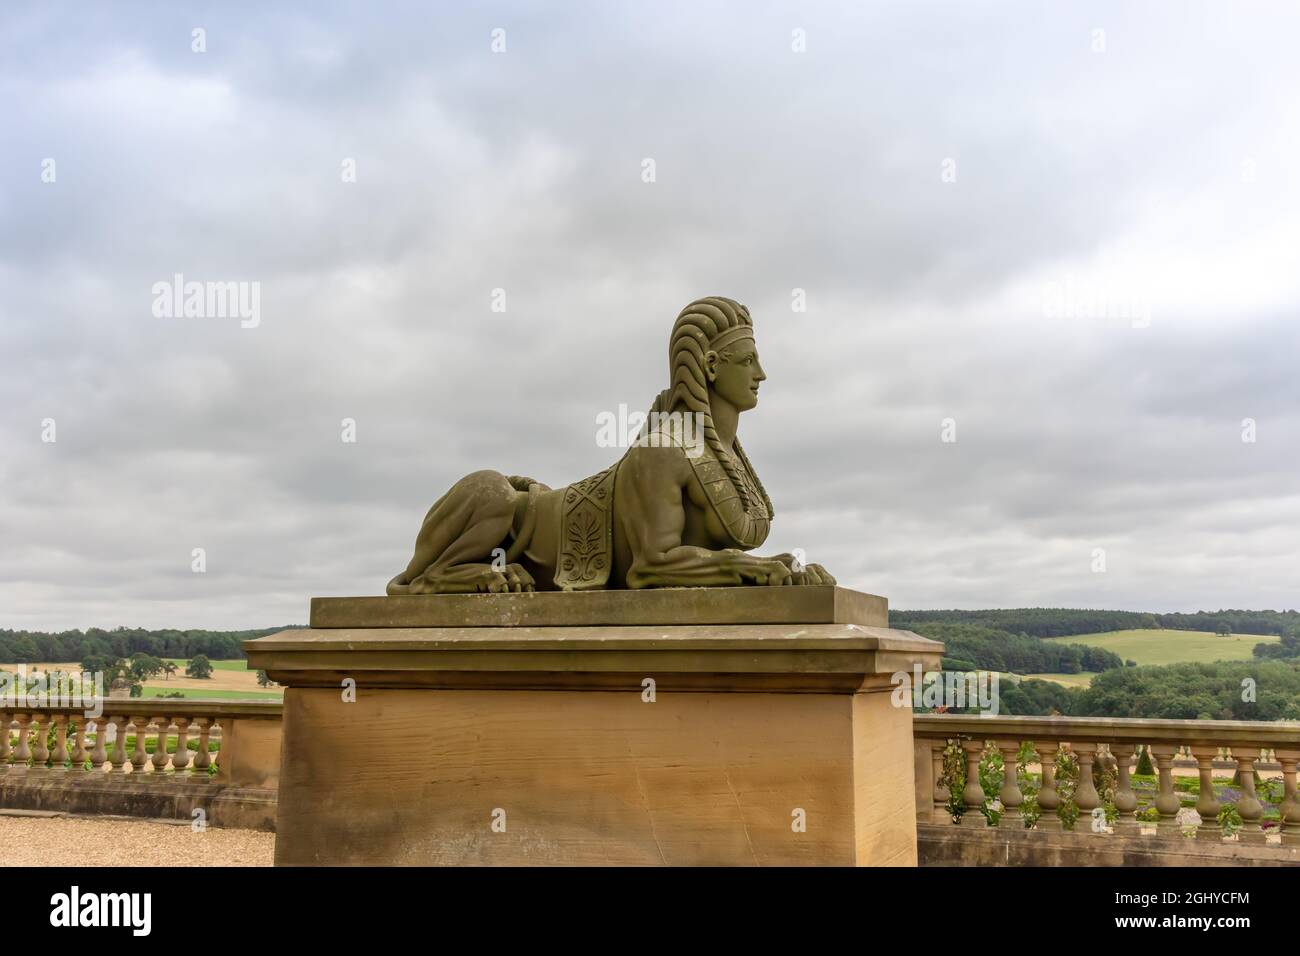 Antique stone carved sculpture of a sphinx, famous monument depicts the body of a lion with a human head in the gardens of Harewood House near Leeds. Stock Photo